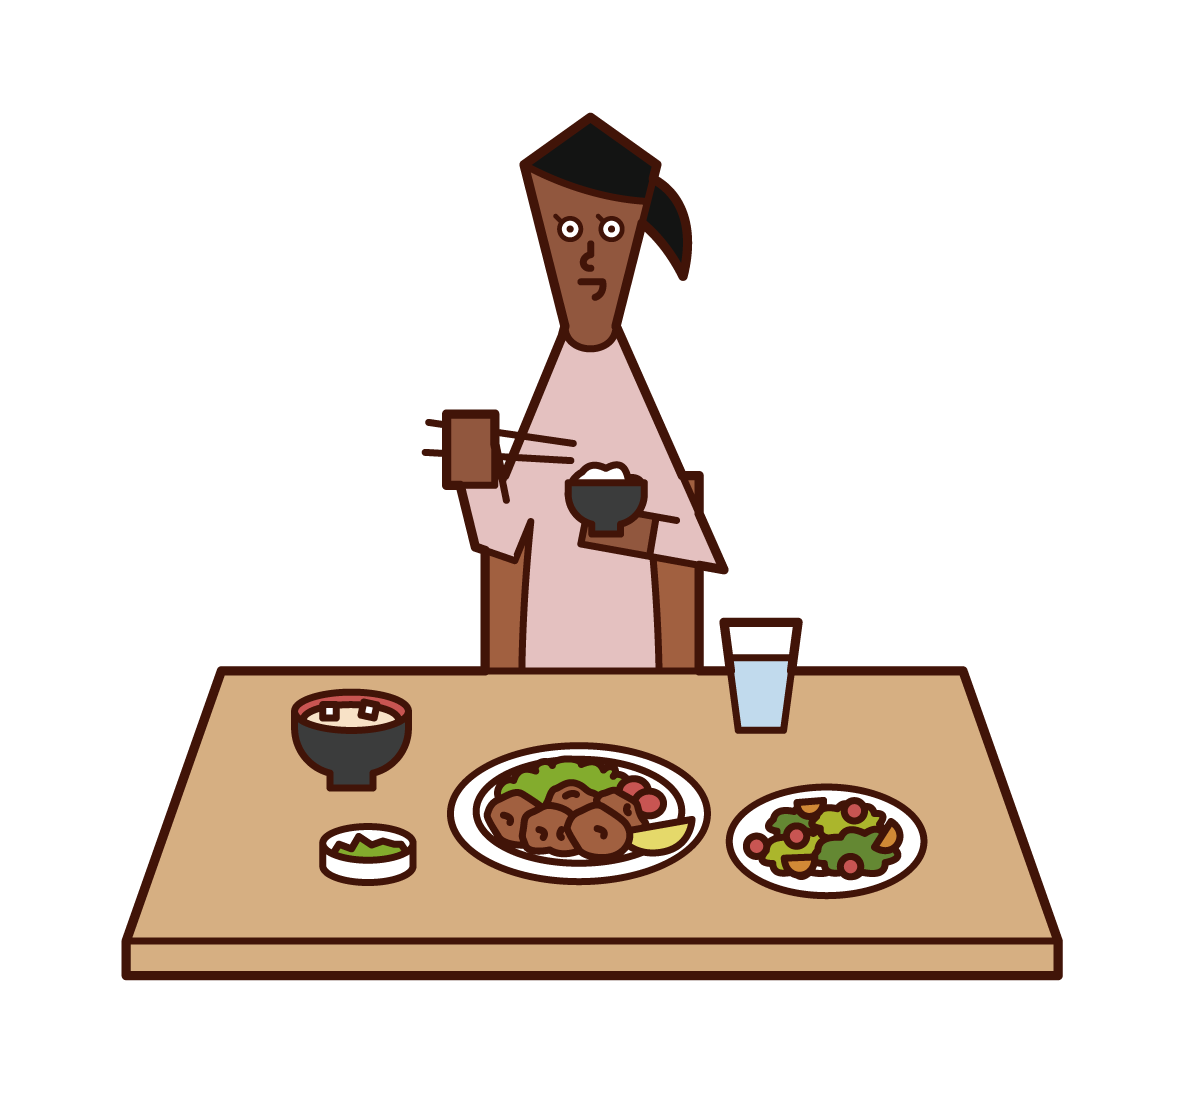 Illustration of a person (woman) eating